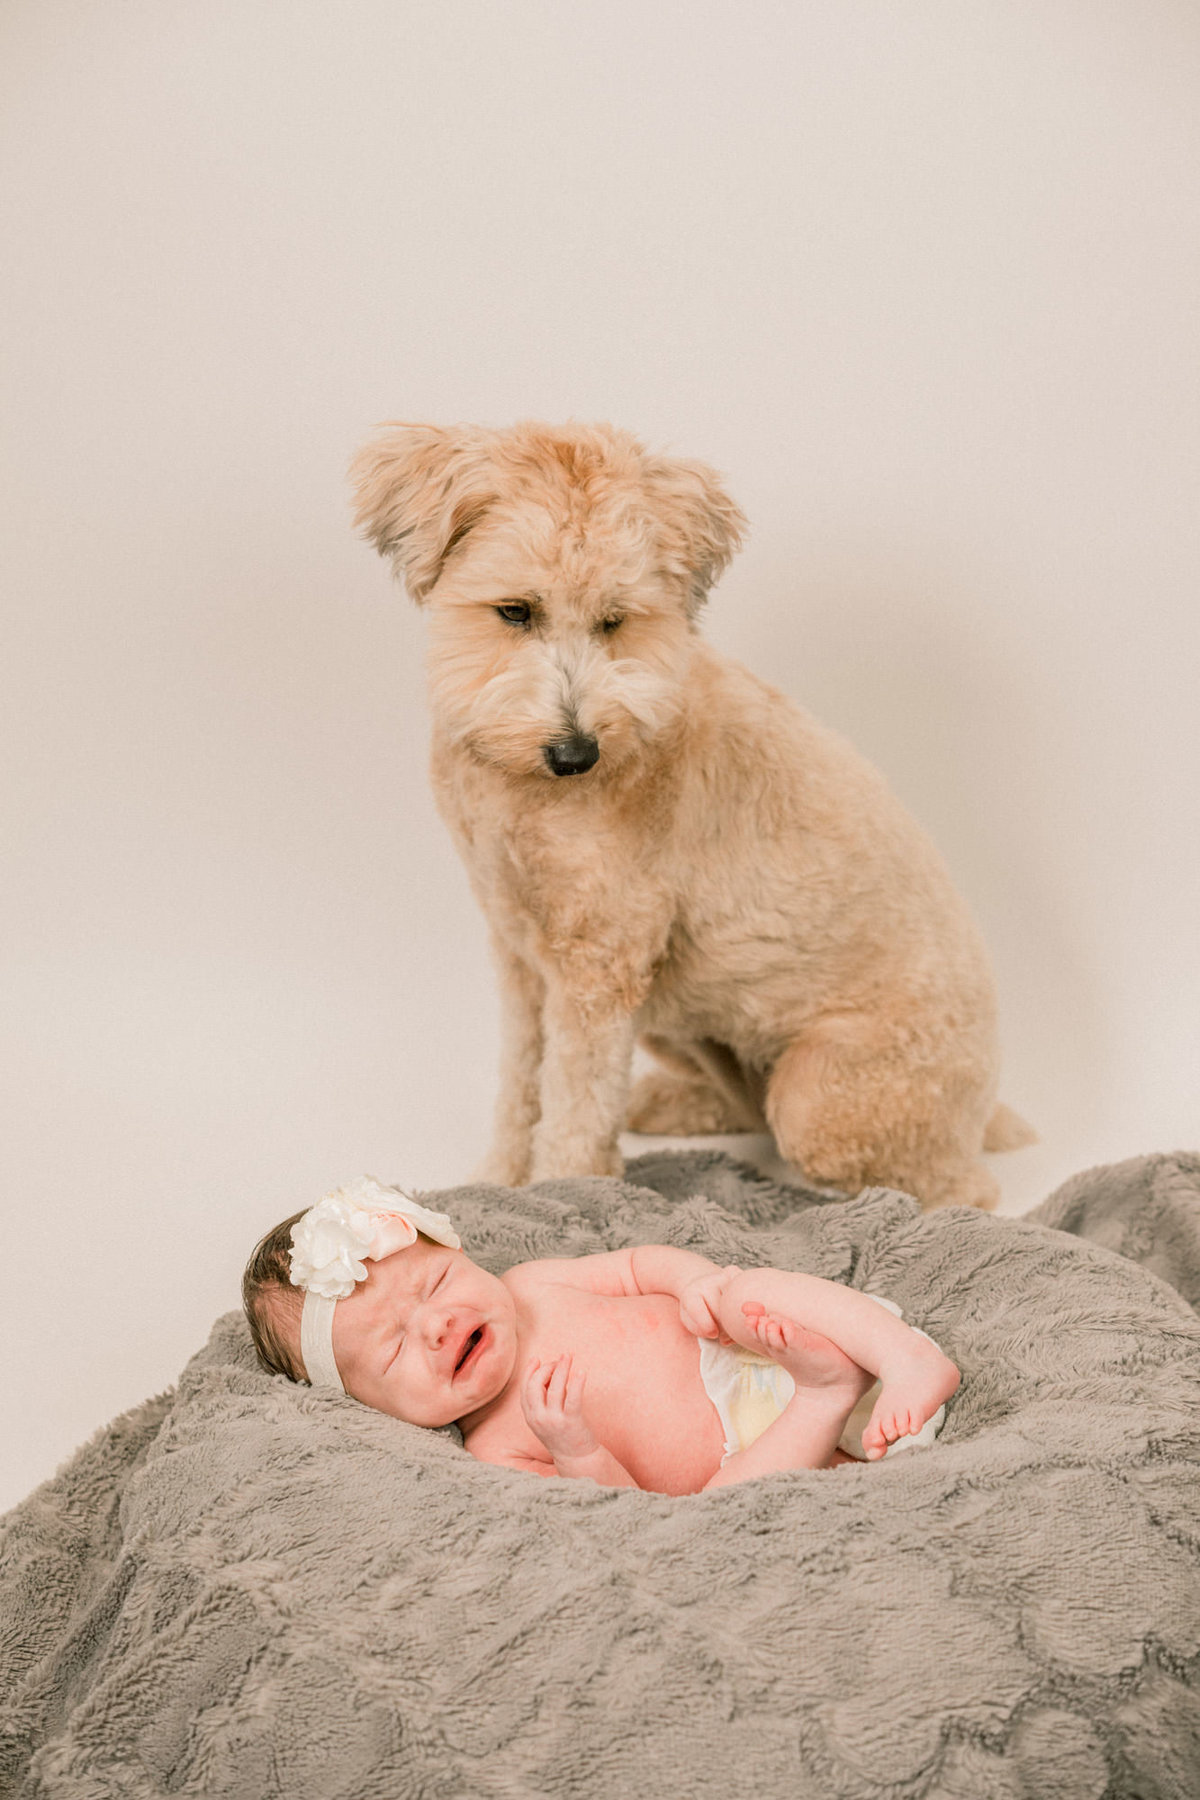 Dog looks down at the baby during a newborn photography session